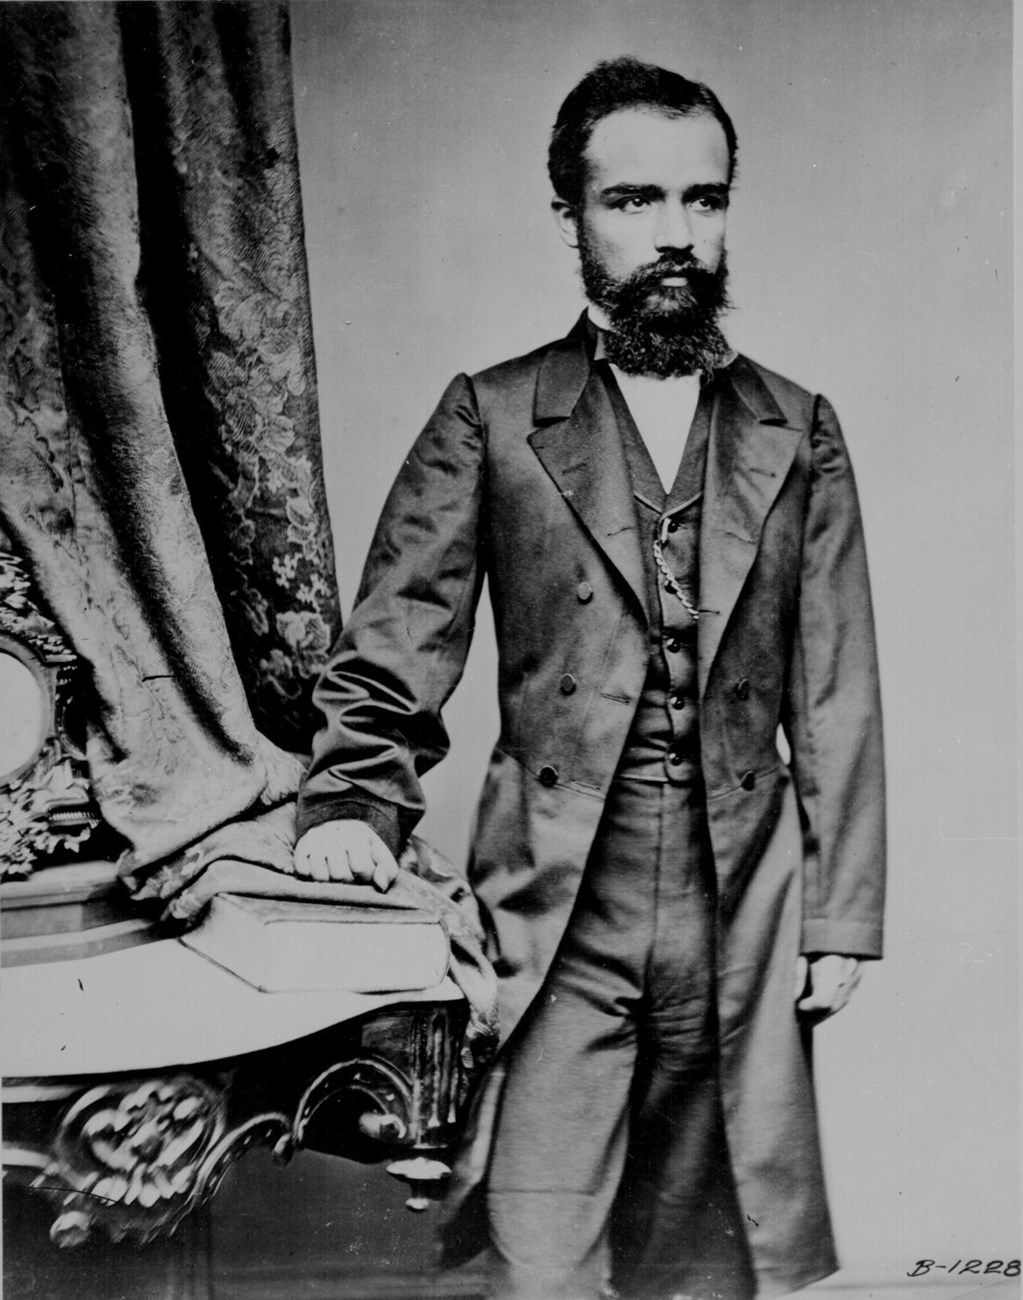 Bearded man stands posed in suit with long coat